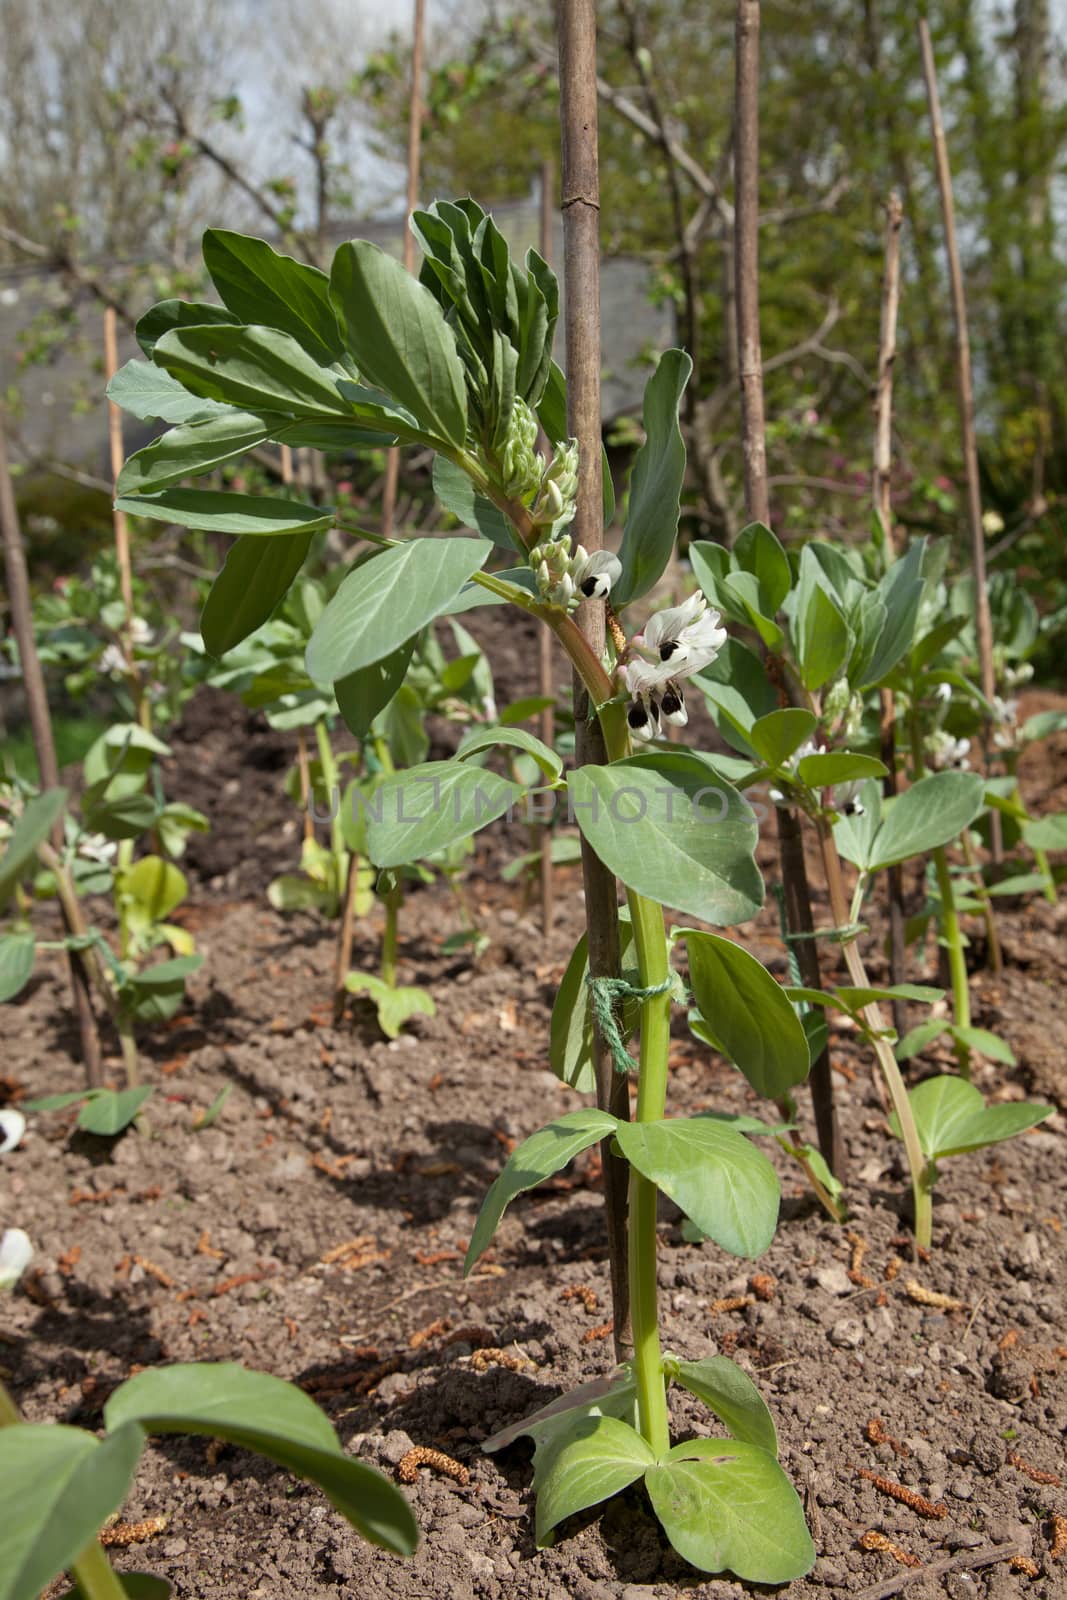 Flowering broad bean plants planted in soil, in rows, with cane supports.